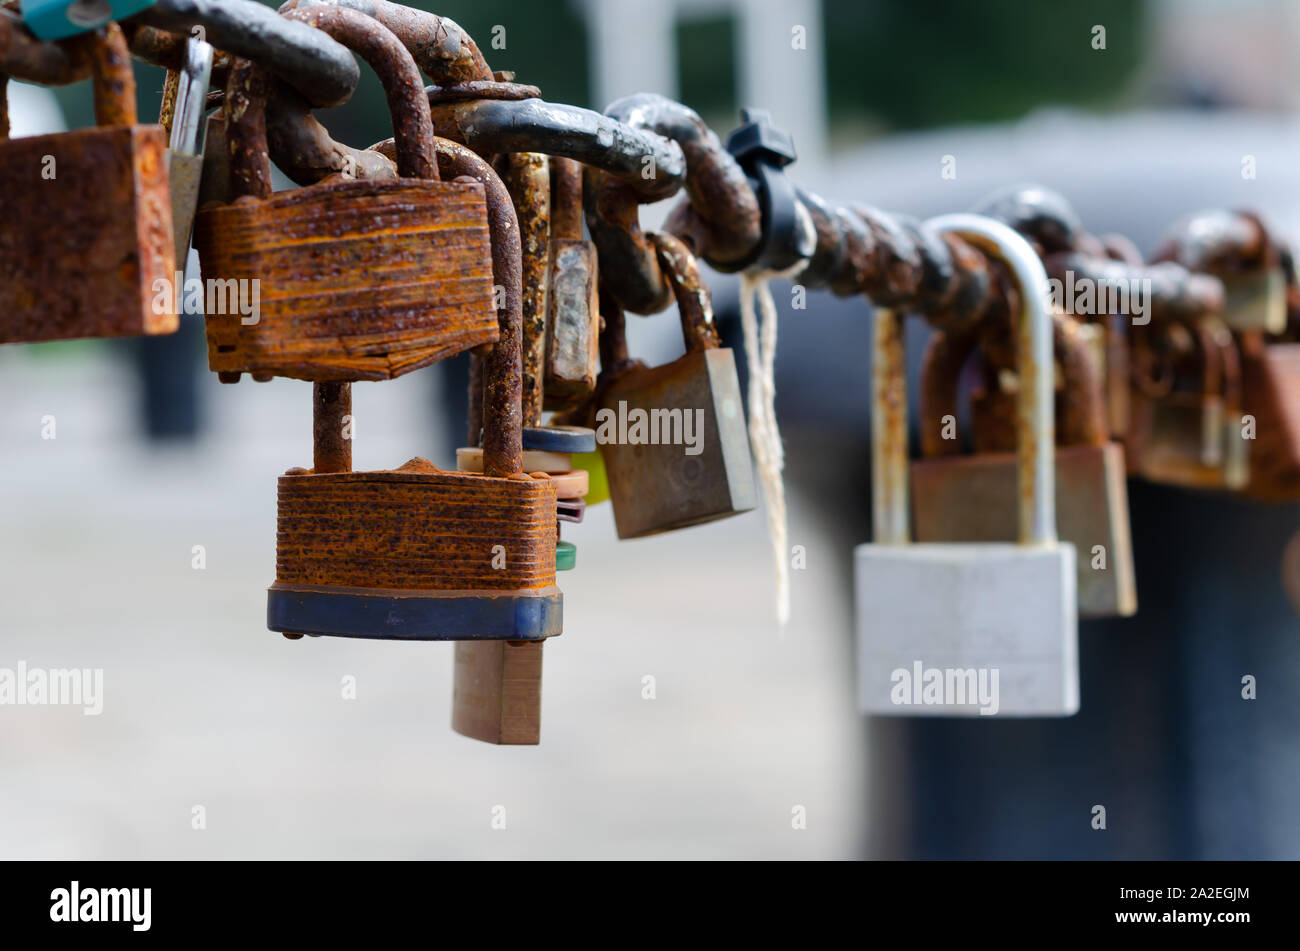 Love Locks at Albert Dock,  Liverpool. The fence chains are full of contrast: old rusted and brand new padlocks of different shape and sizes. Stock Photo